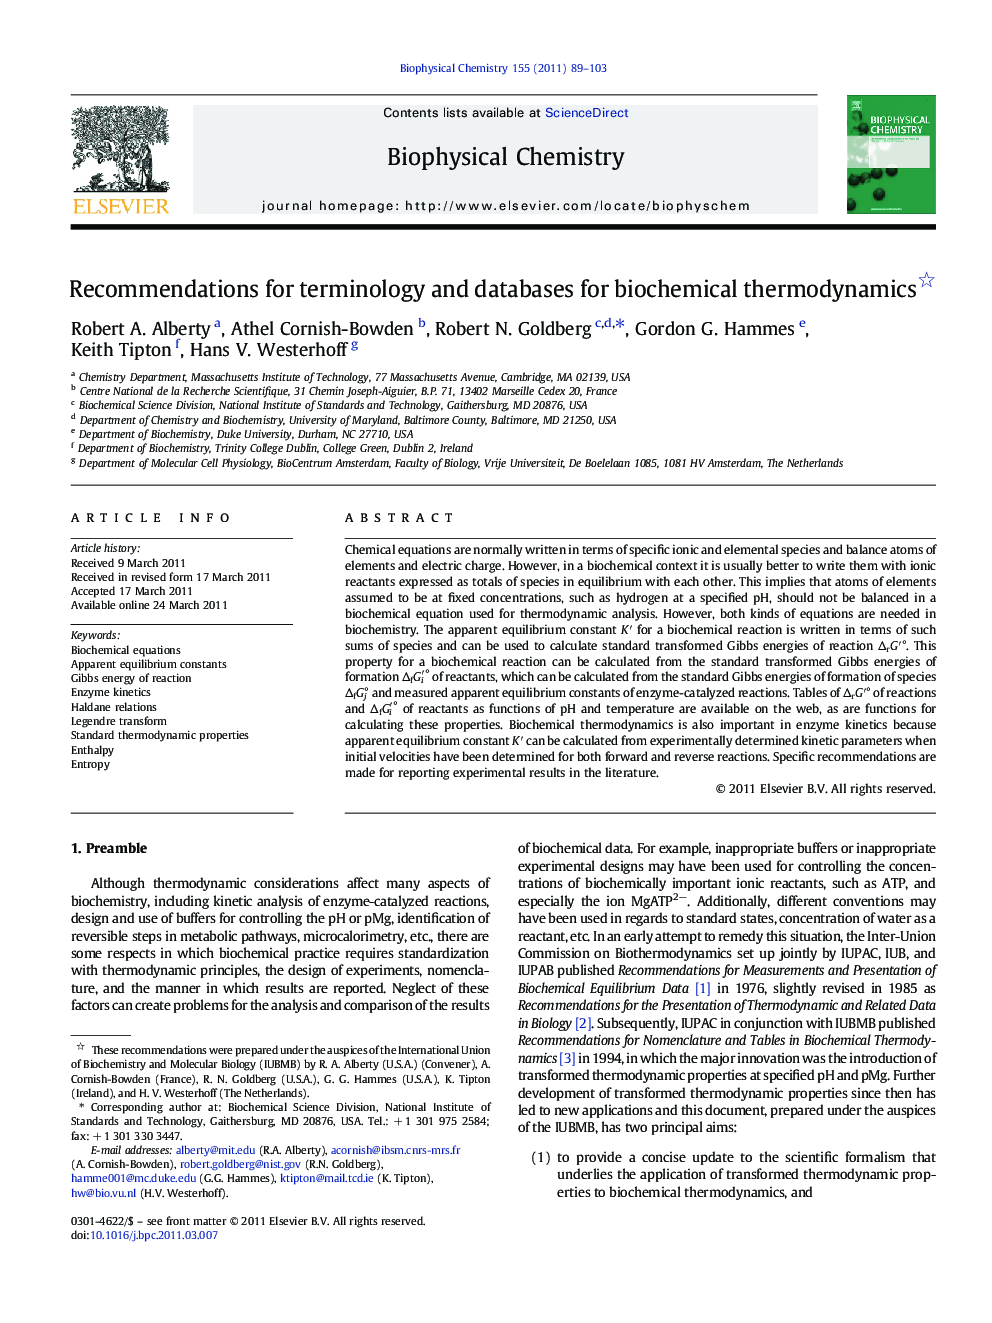 Recommendations for terminology and databases for biochemical thermodynamics